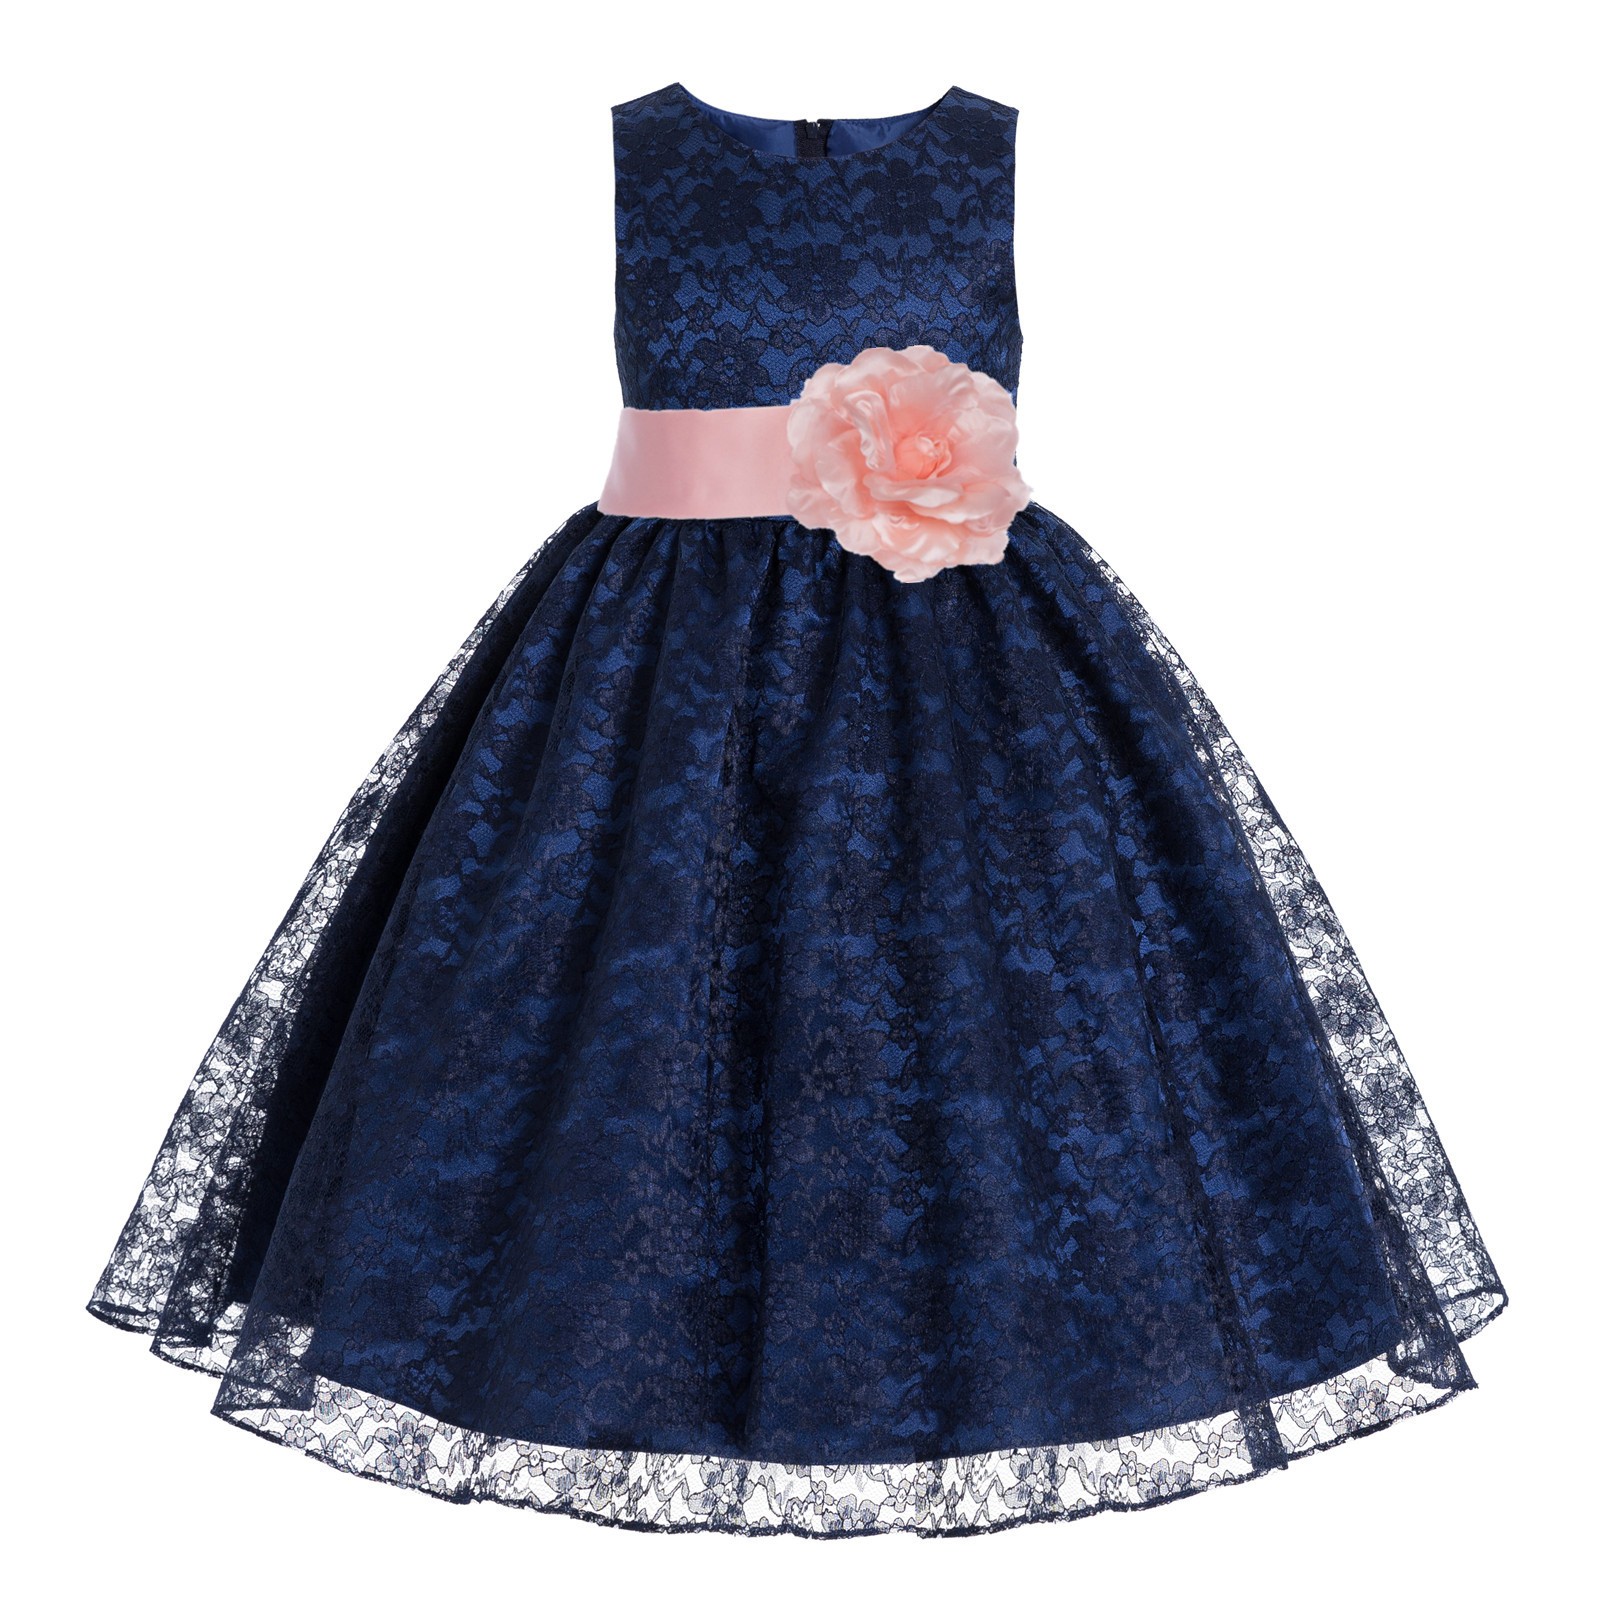 Navy / Peach Floral Lace Overlay Flower Girl Dress Lace Dresses 163s